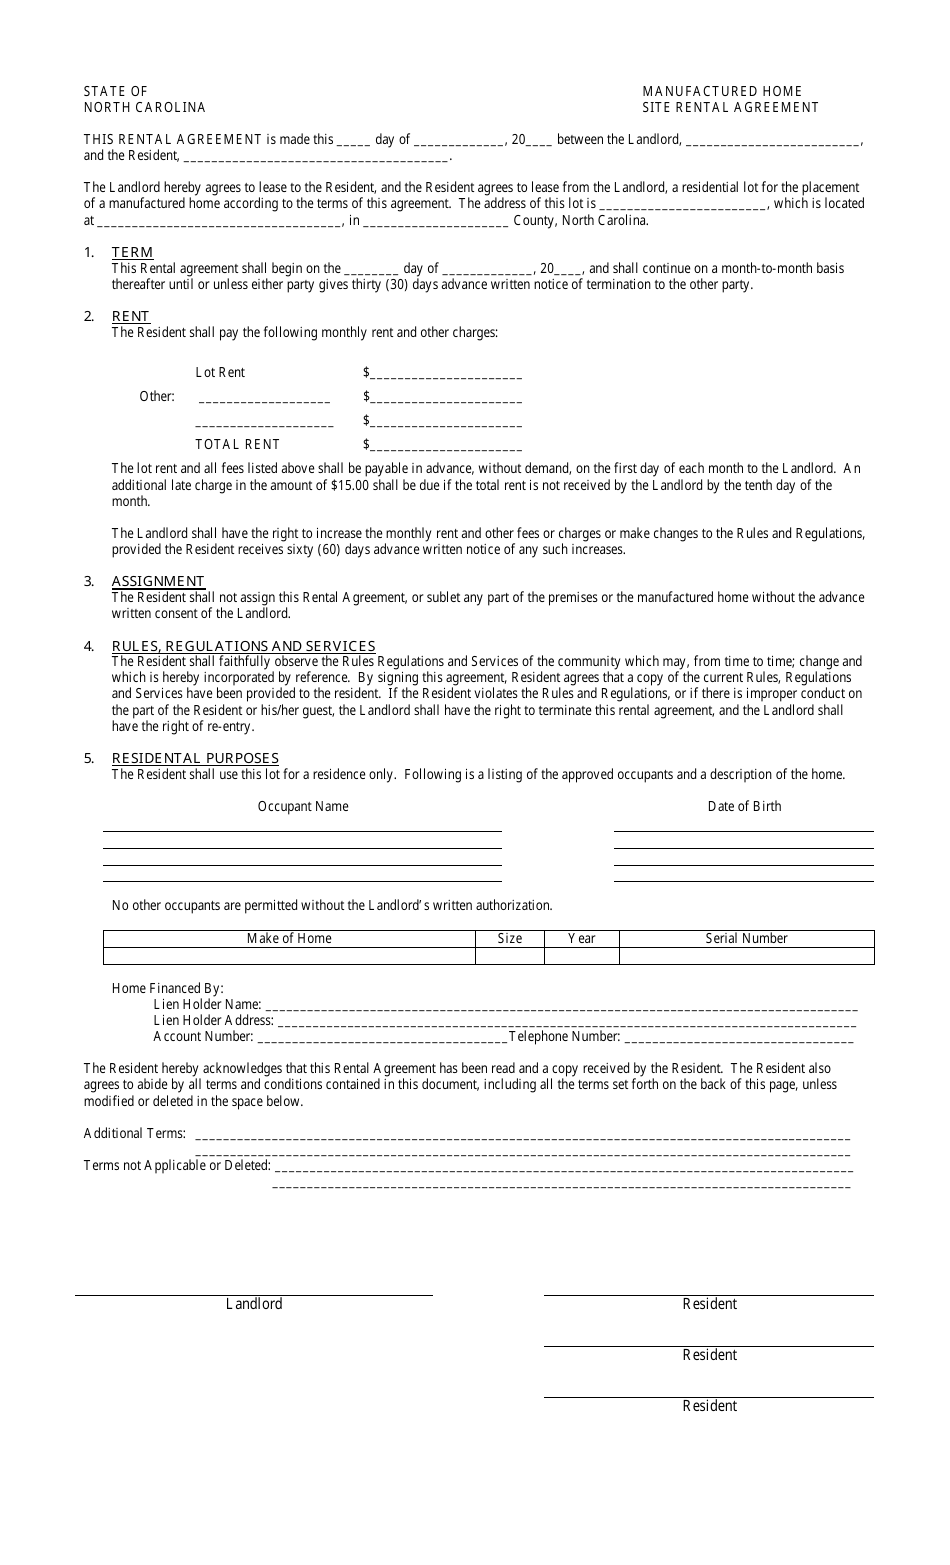 Manufactured Home Site Rental Agreement Template - North Carolina, Page 1